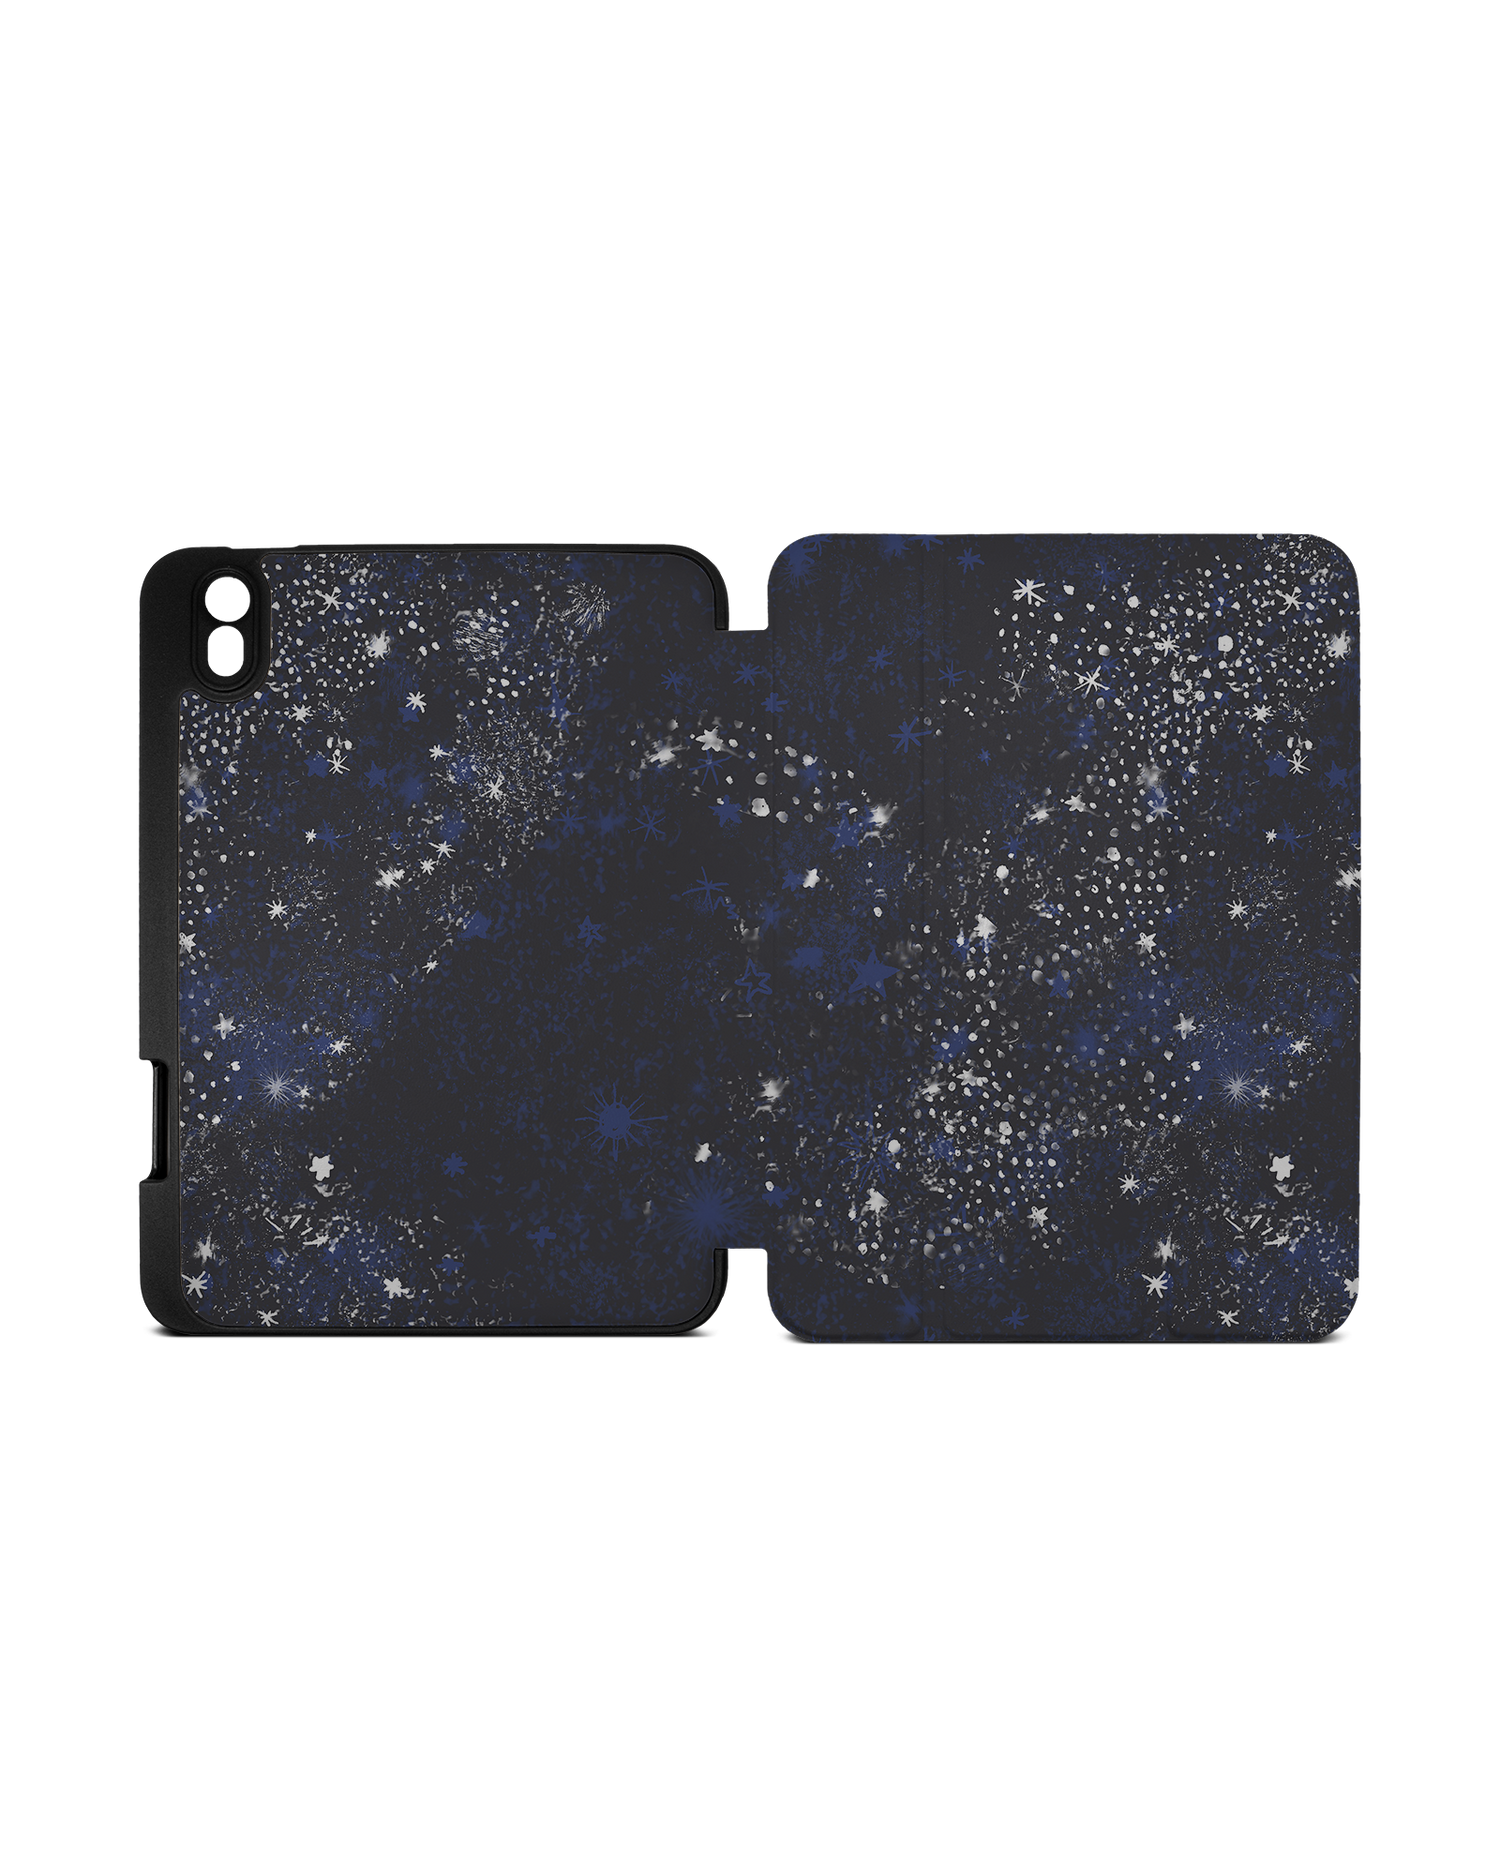 Starry Night Sky iPad Case with Pencil Holder Apple iPad mini 6 (2021): Opened exterior view